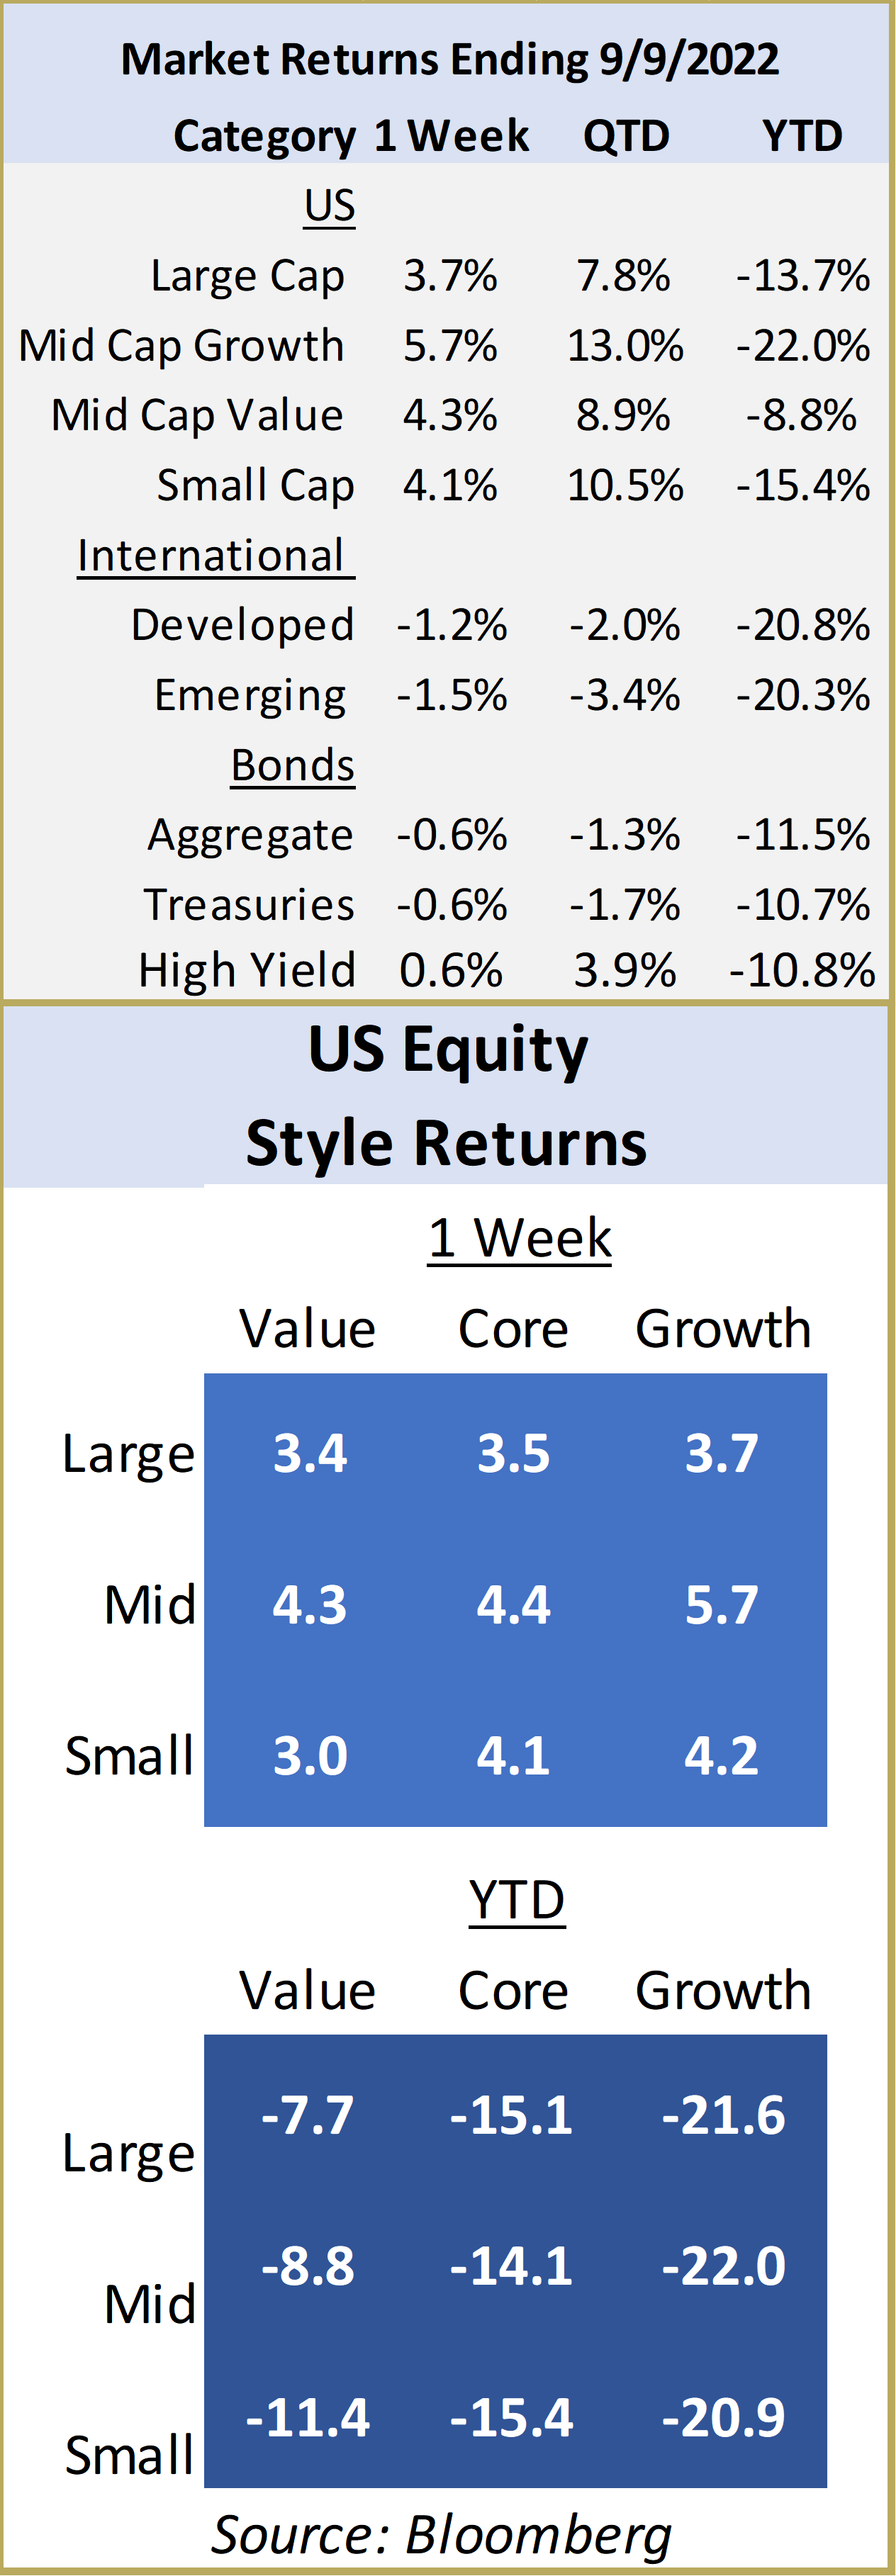 Market Returns Ending 9/9/2022 and US Equity Style Returns